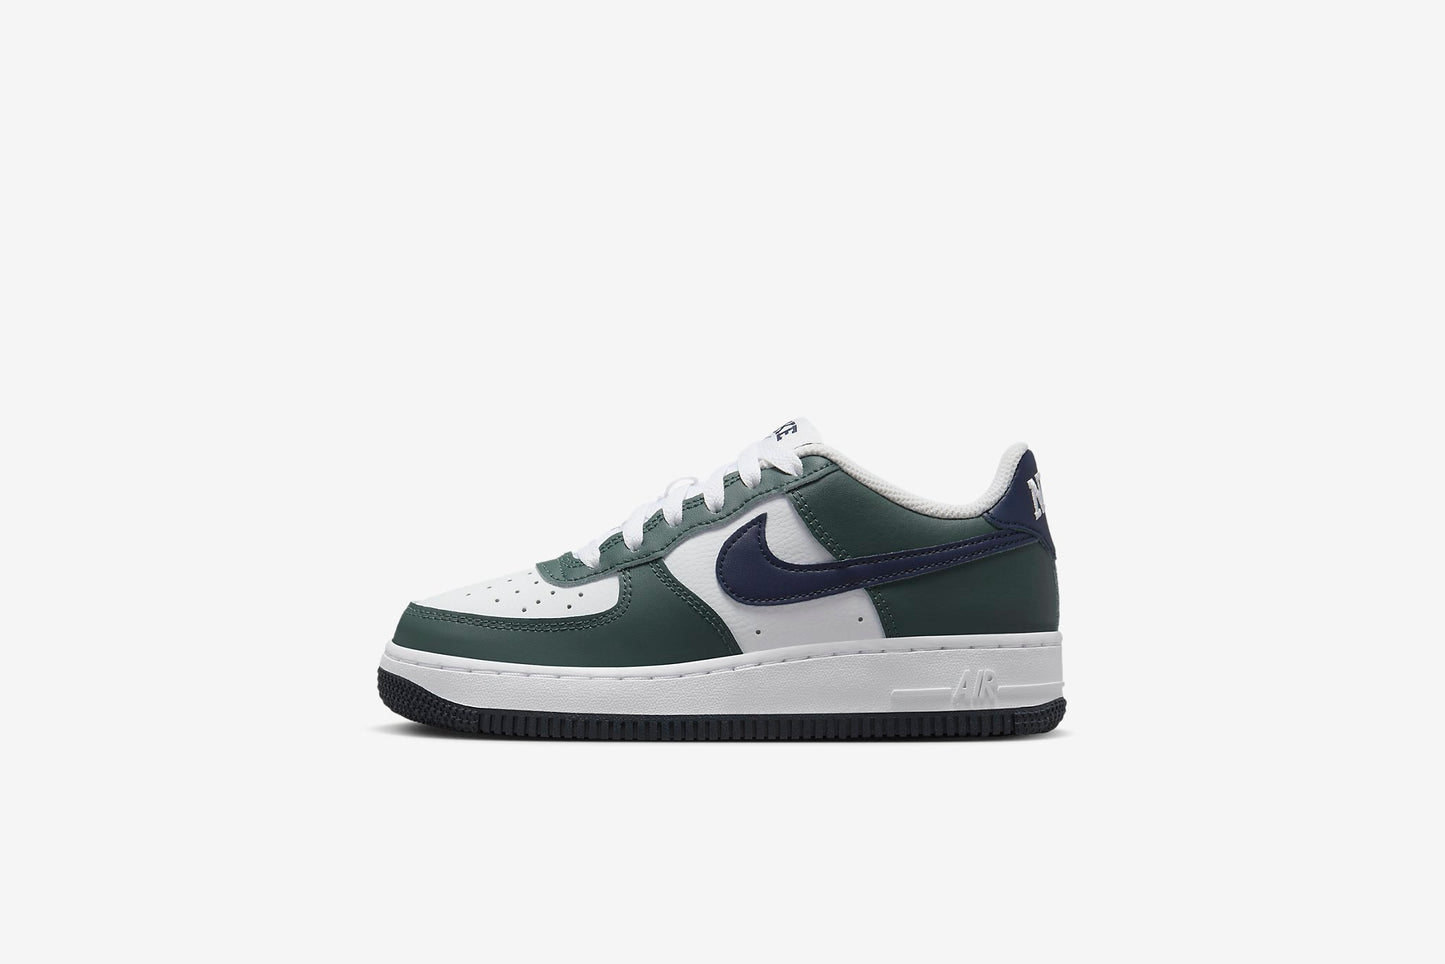 nike and "Air Force 1" GS - Vintage Green / Obsidian White